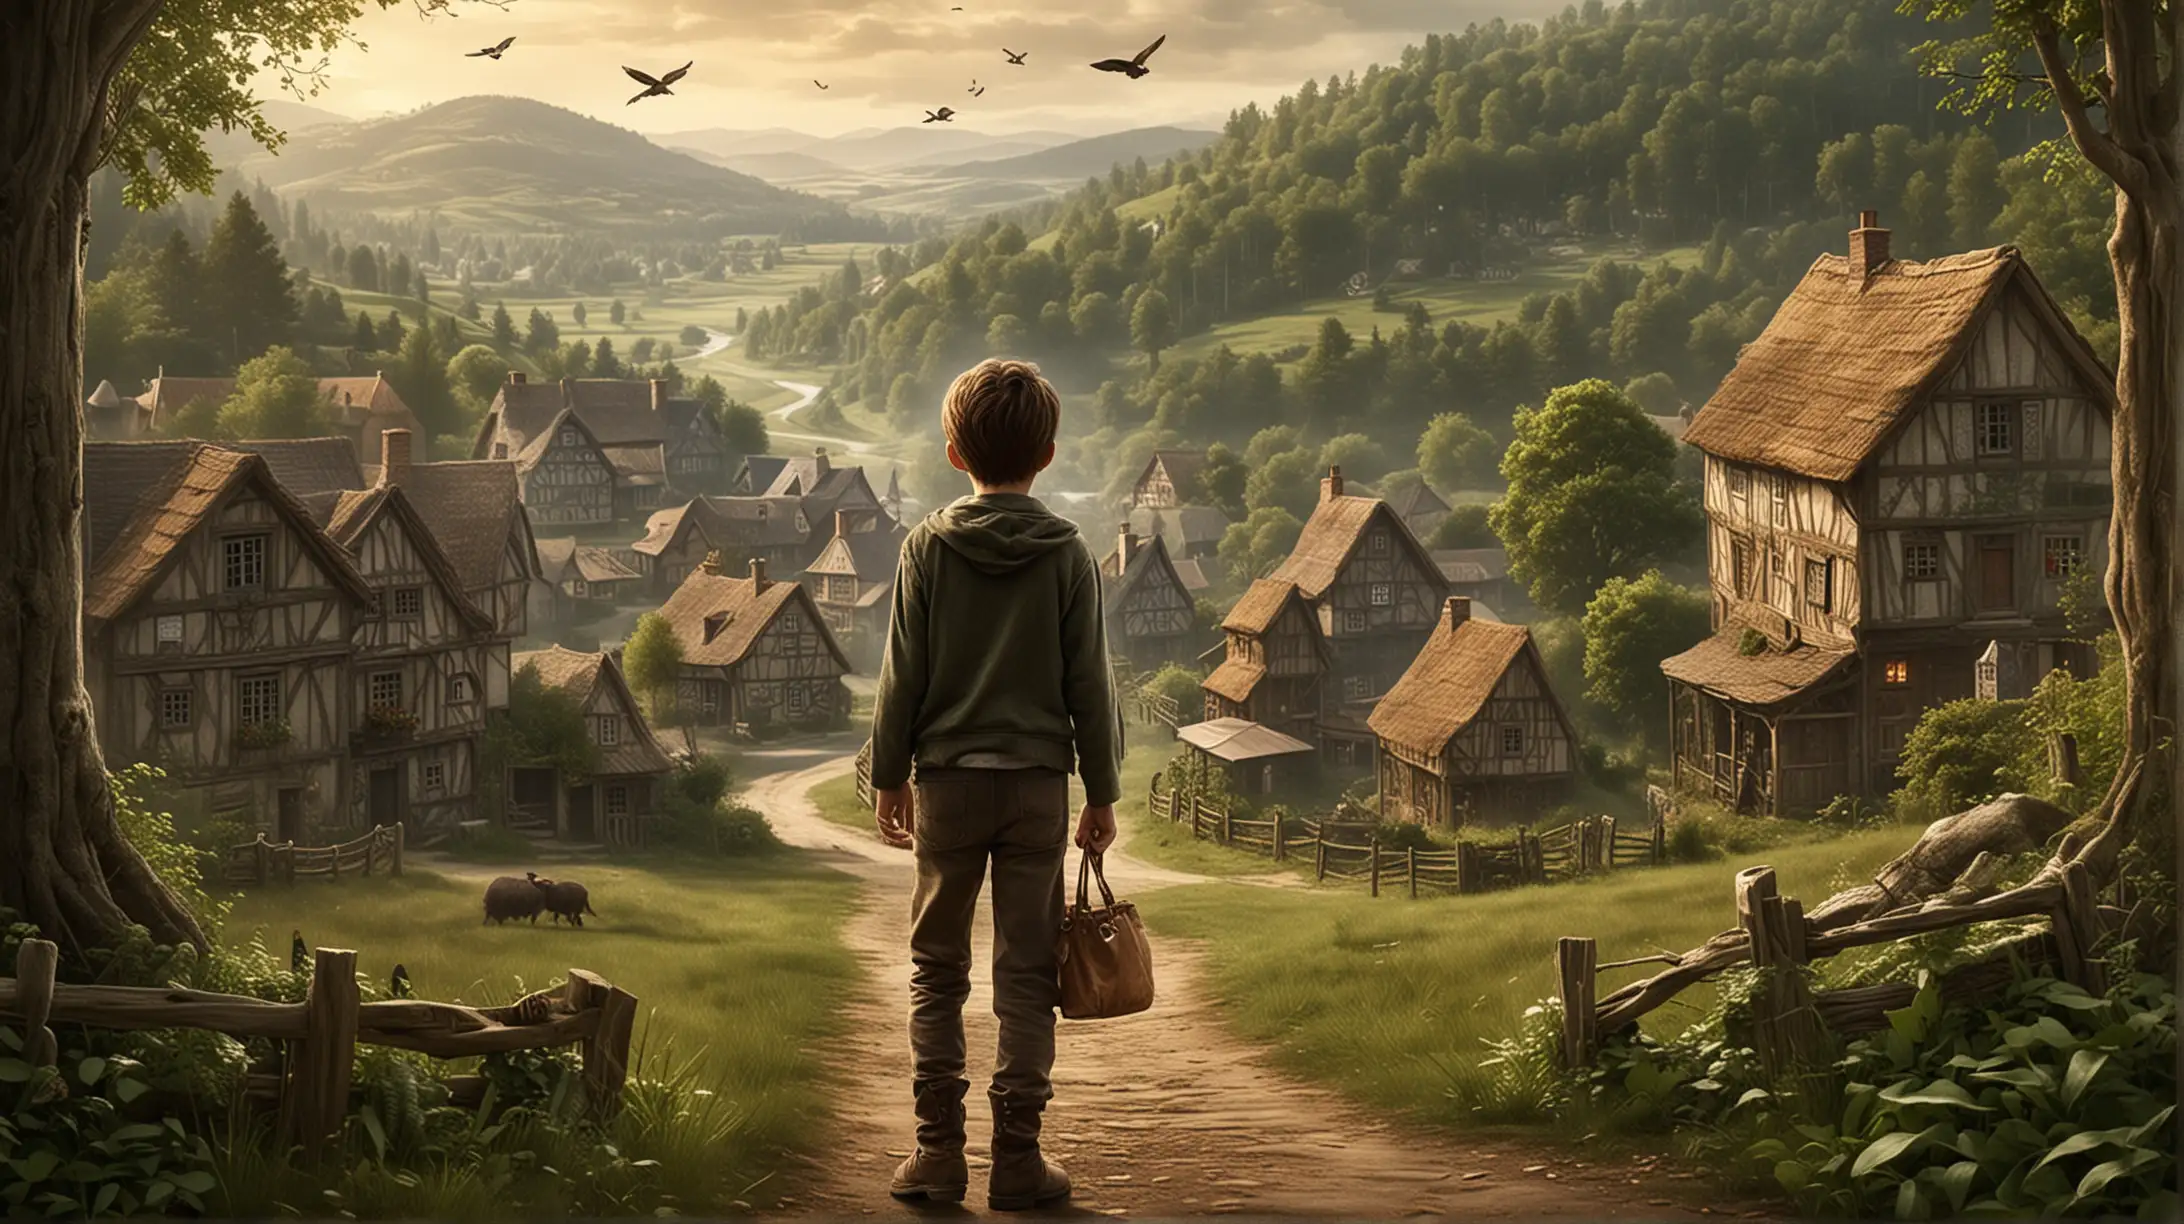 Once upon a time, in a quaint village nestled between rolling hills and whispering forests, there lived a boy named Aiden. Aiden was unlike any other child in the village, for he possessed a remarkable gift - he could fly.